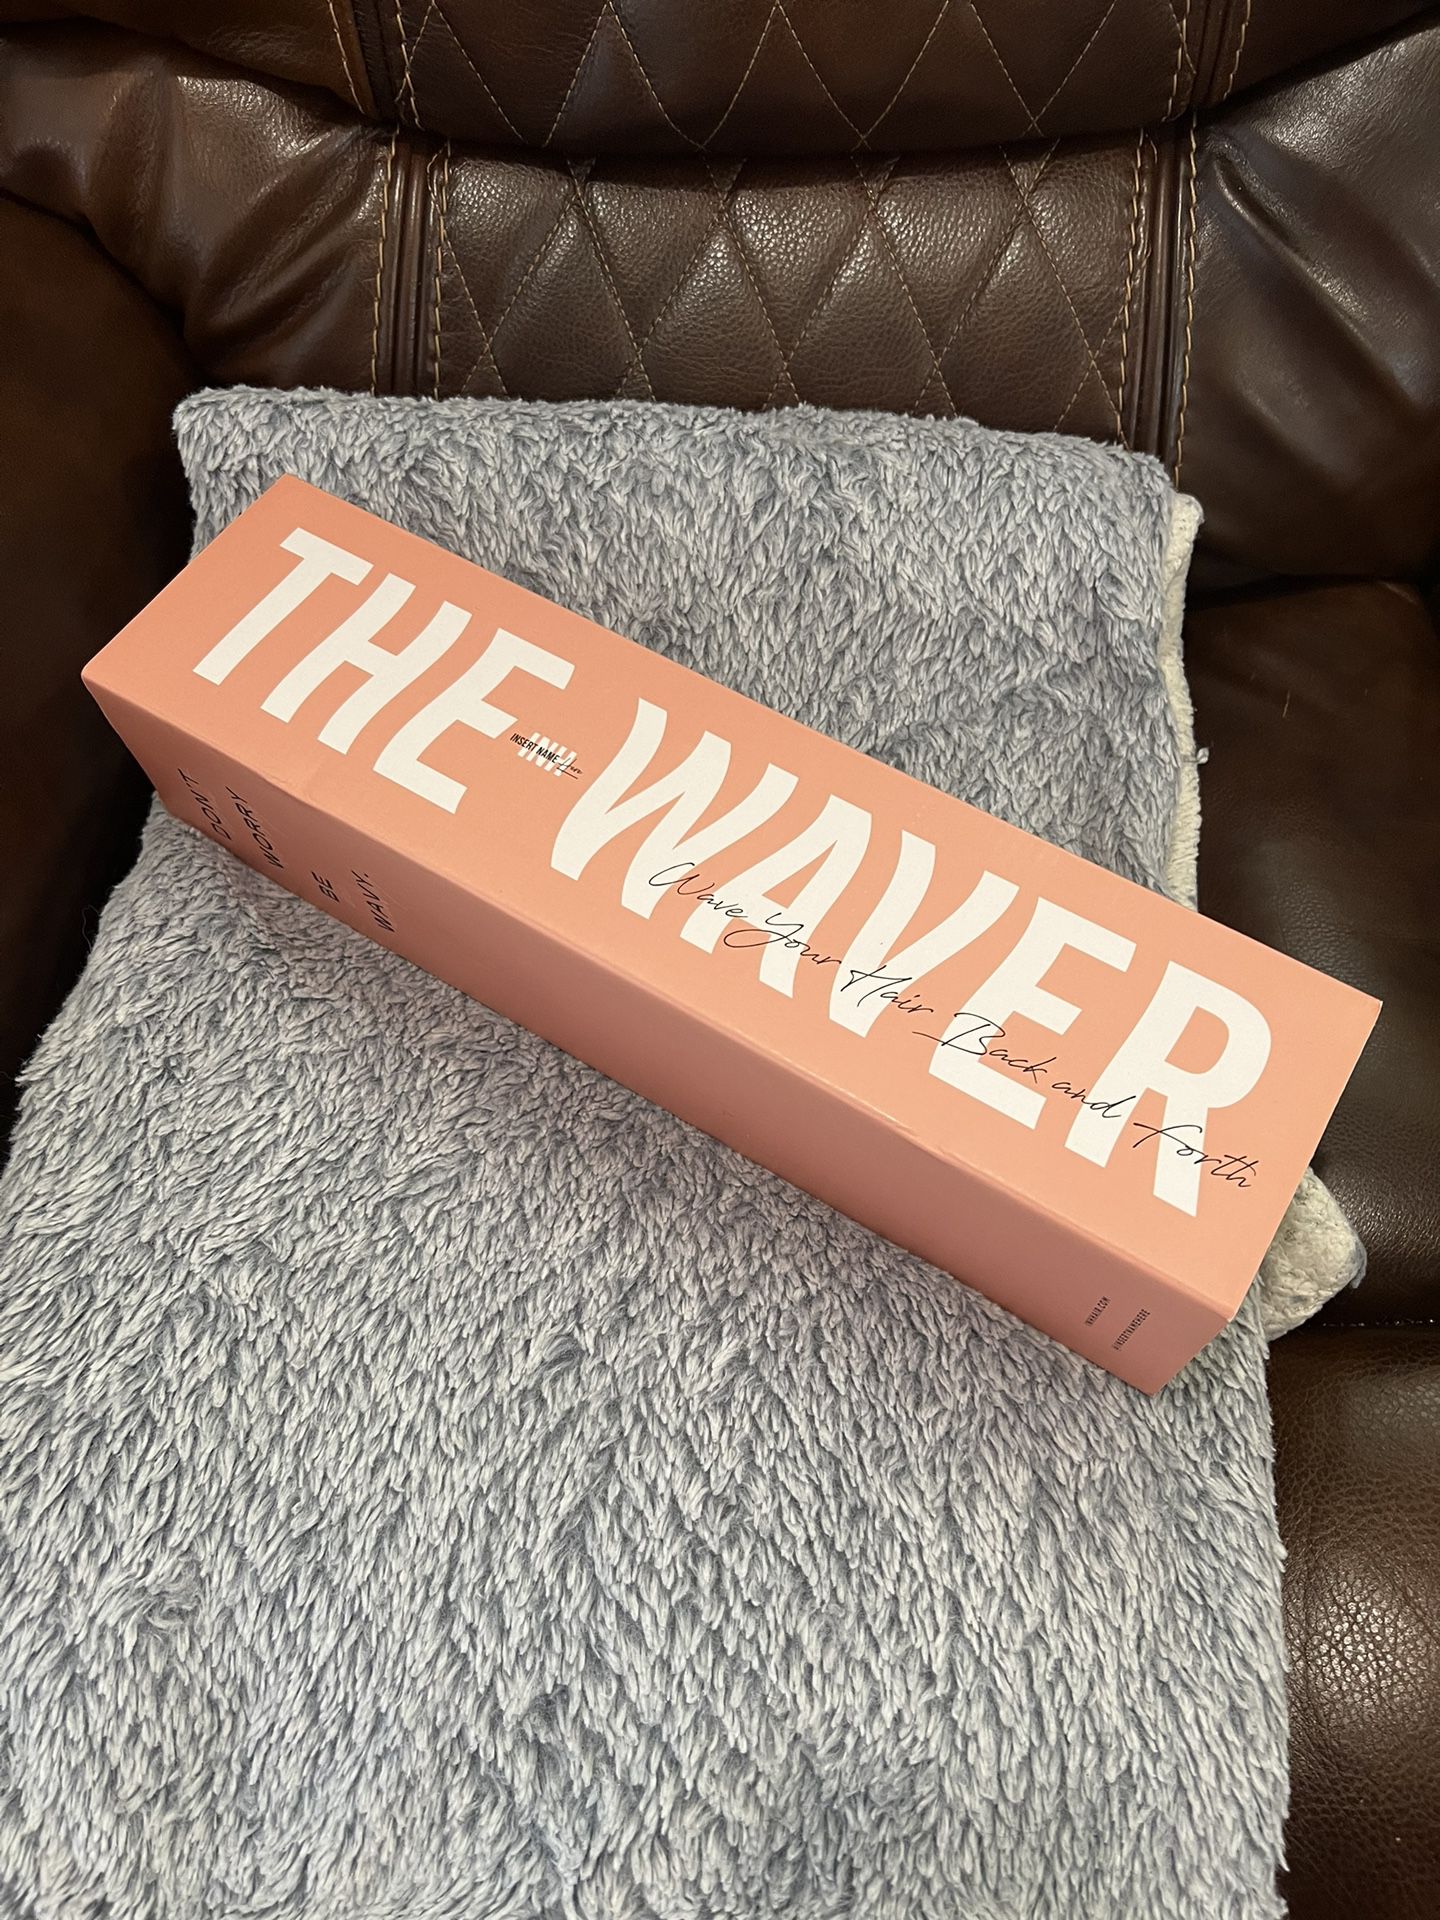 The Waver